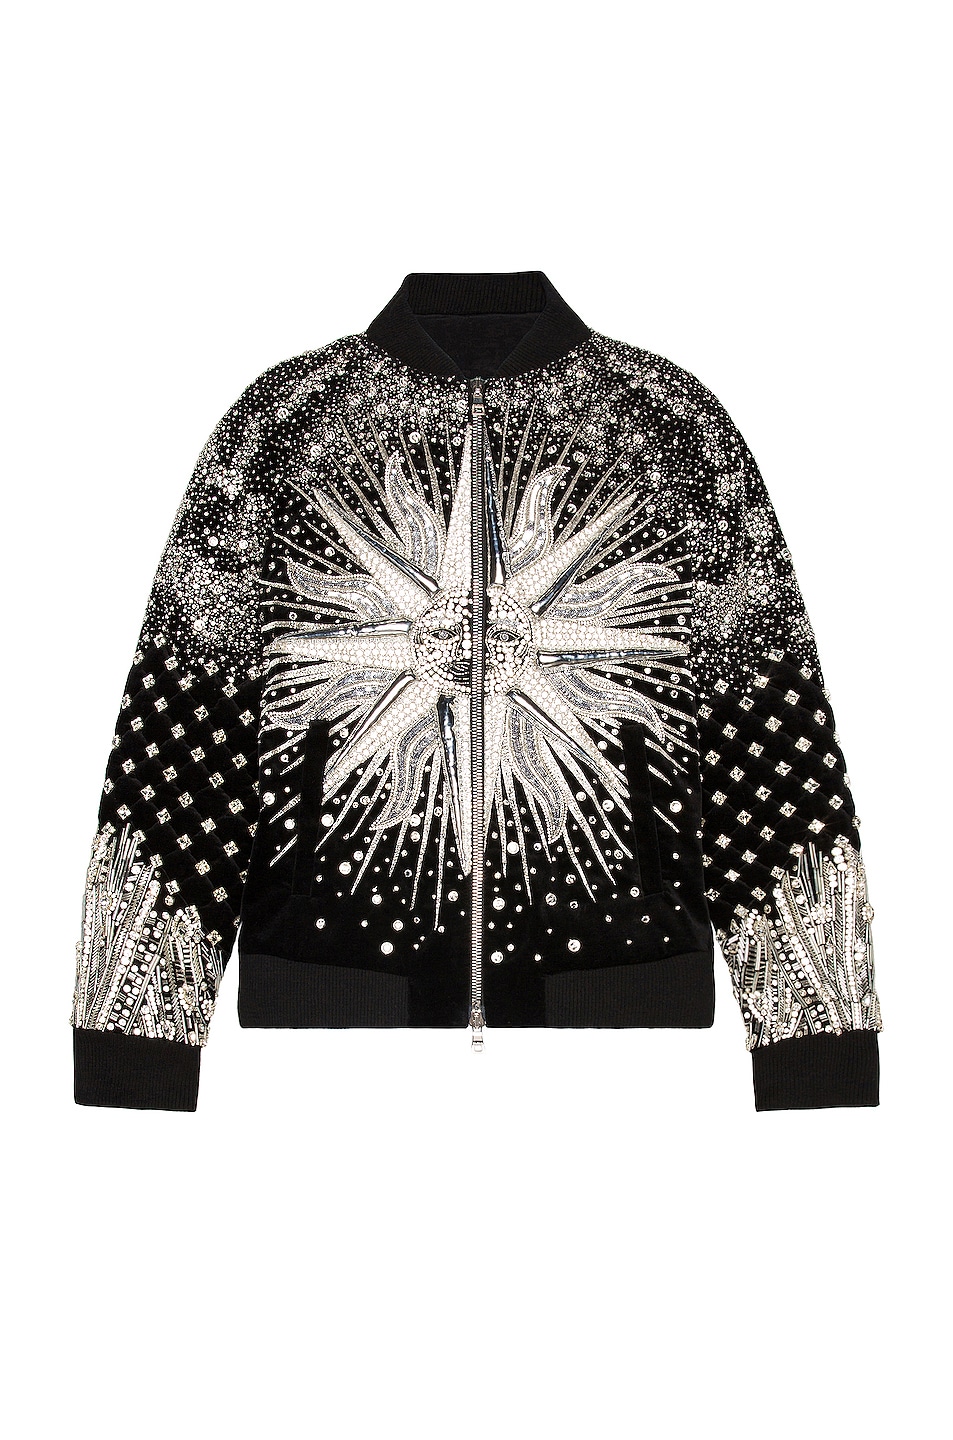 Image 1 of BALMAIN Embroidered Bomber Jacket in Noir & Argent